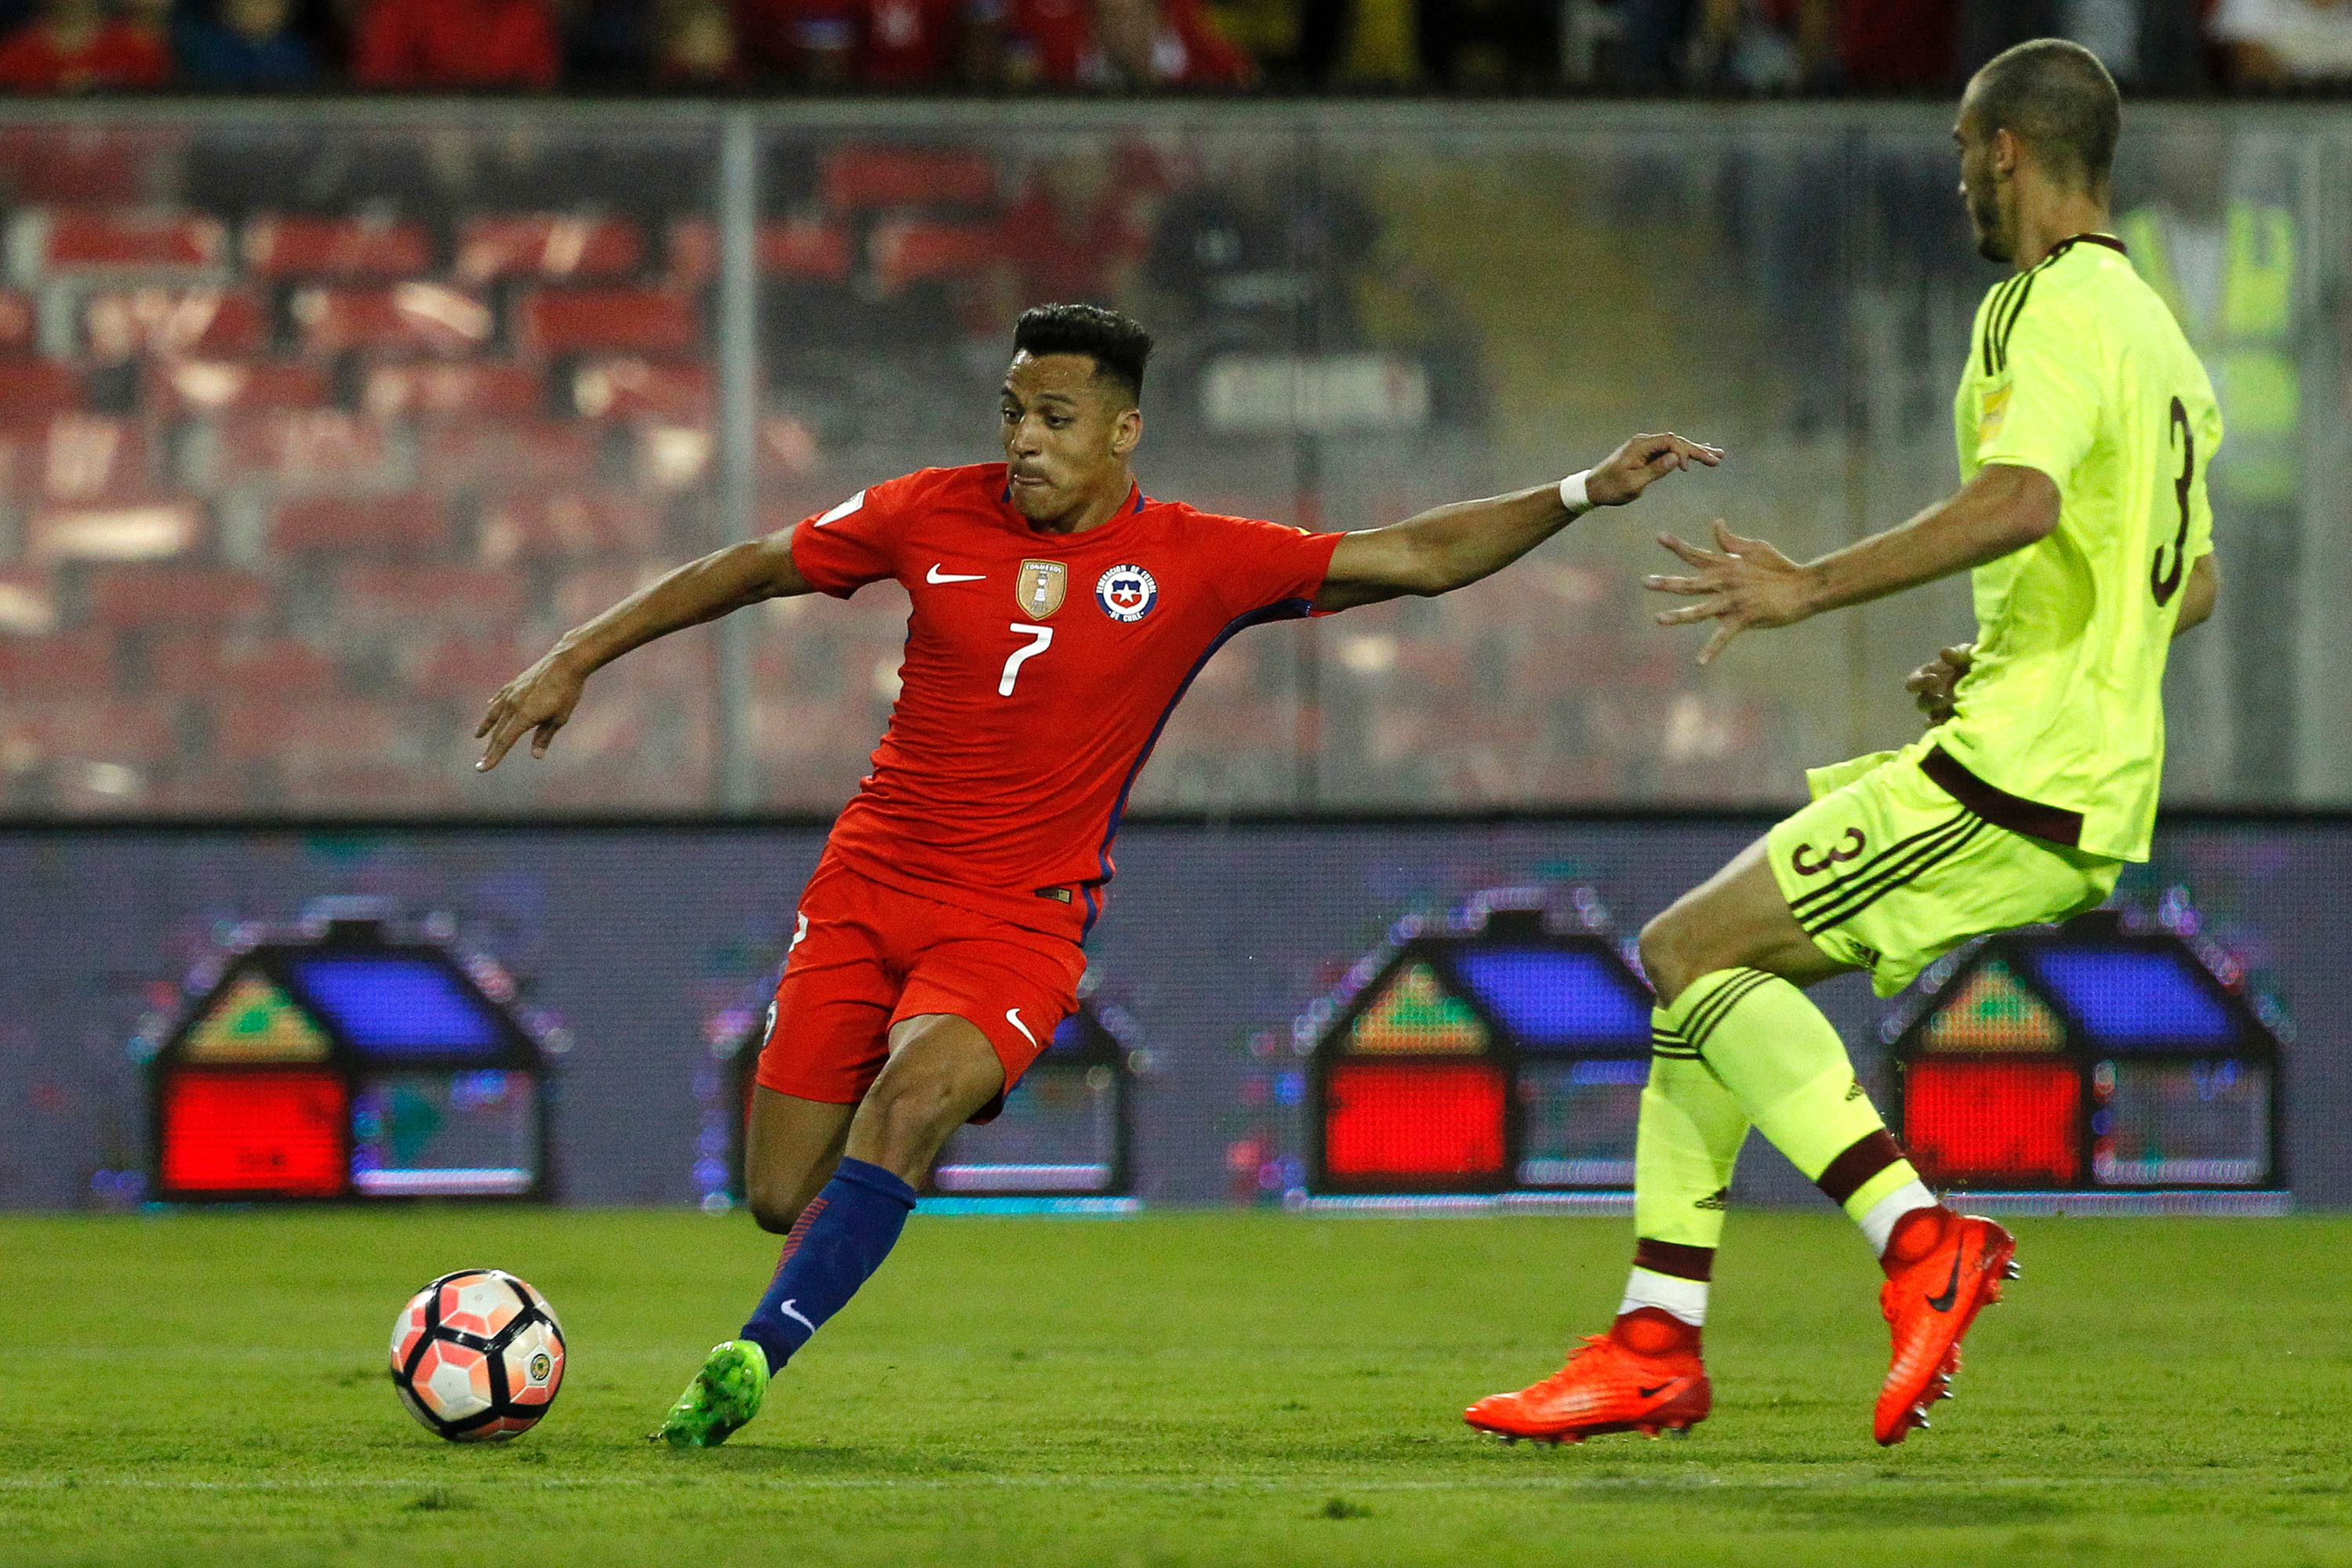 Chile's forward Alexis Sanchez (L) prepares to kick the ball next to Venezuela's defender Mike Villanueva during their 2018 FIFA World Cup qualifier football match in Santiago, Chile on March 28, 2017. / AFP PHOTO / Claudio Reyes        (Photo credit should read CLAUDIO REYES/AFP/Getty Images)